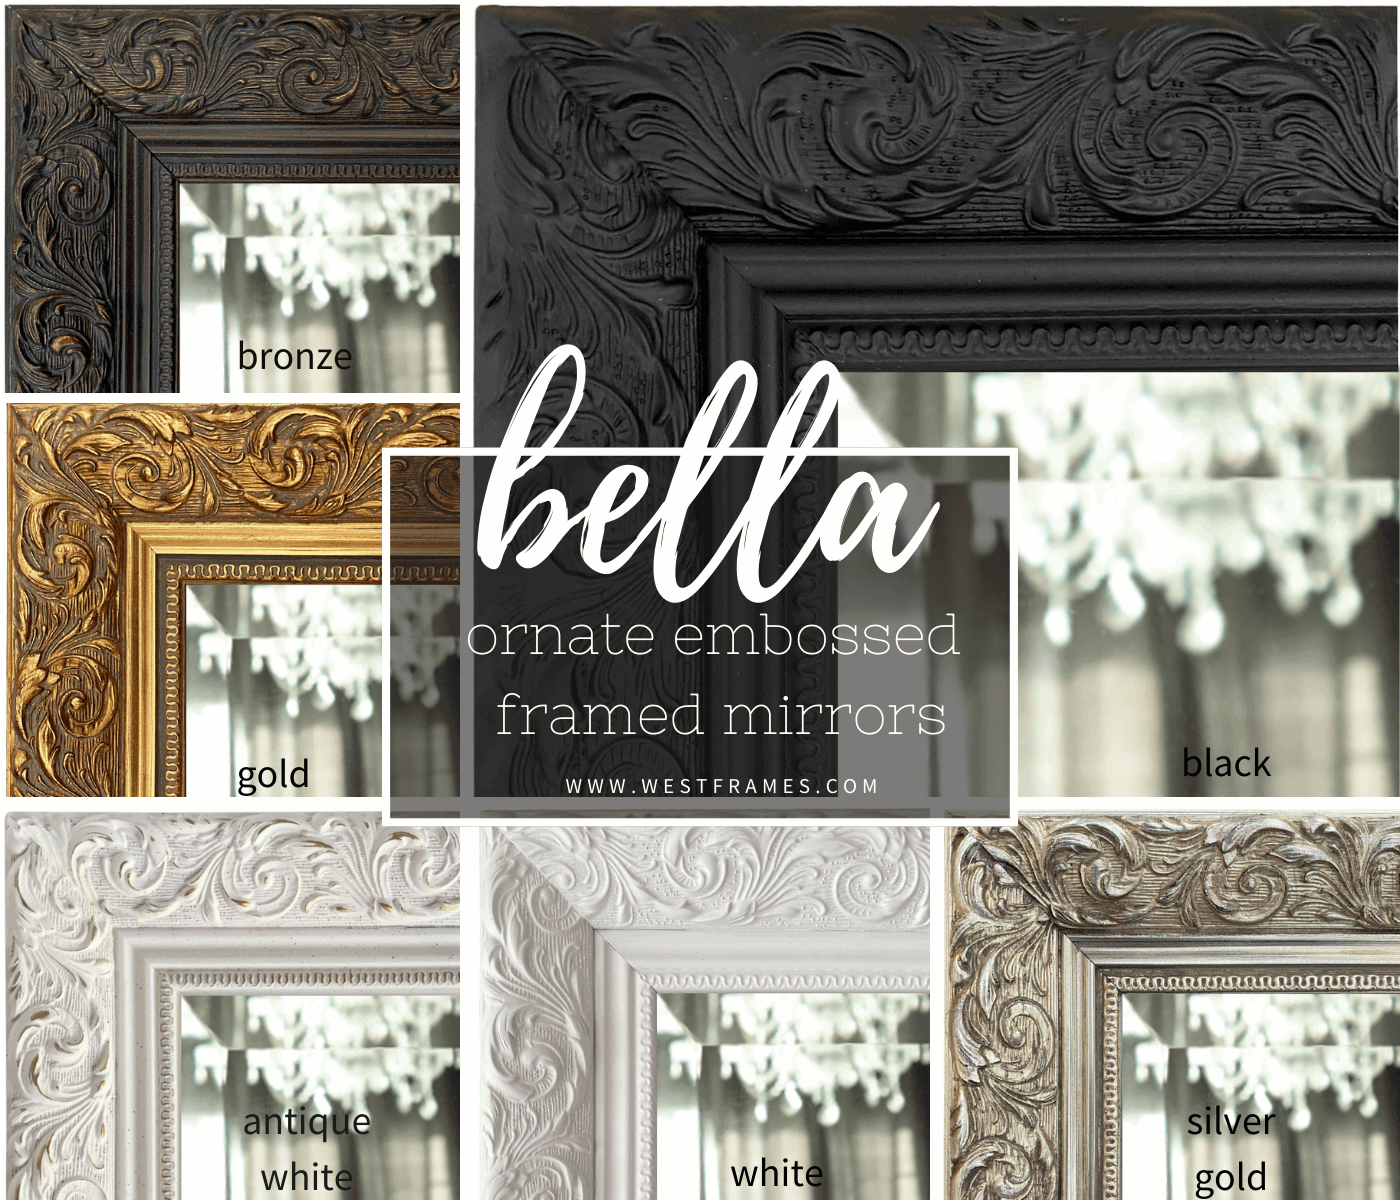 Bella French Ornate Embossed Framed Wall Mirror Antique White - West Frames